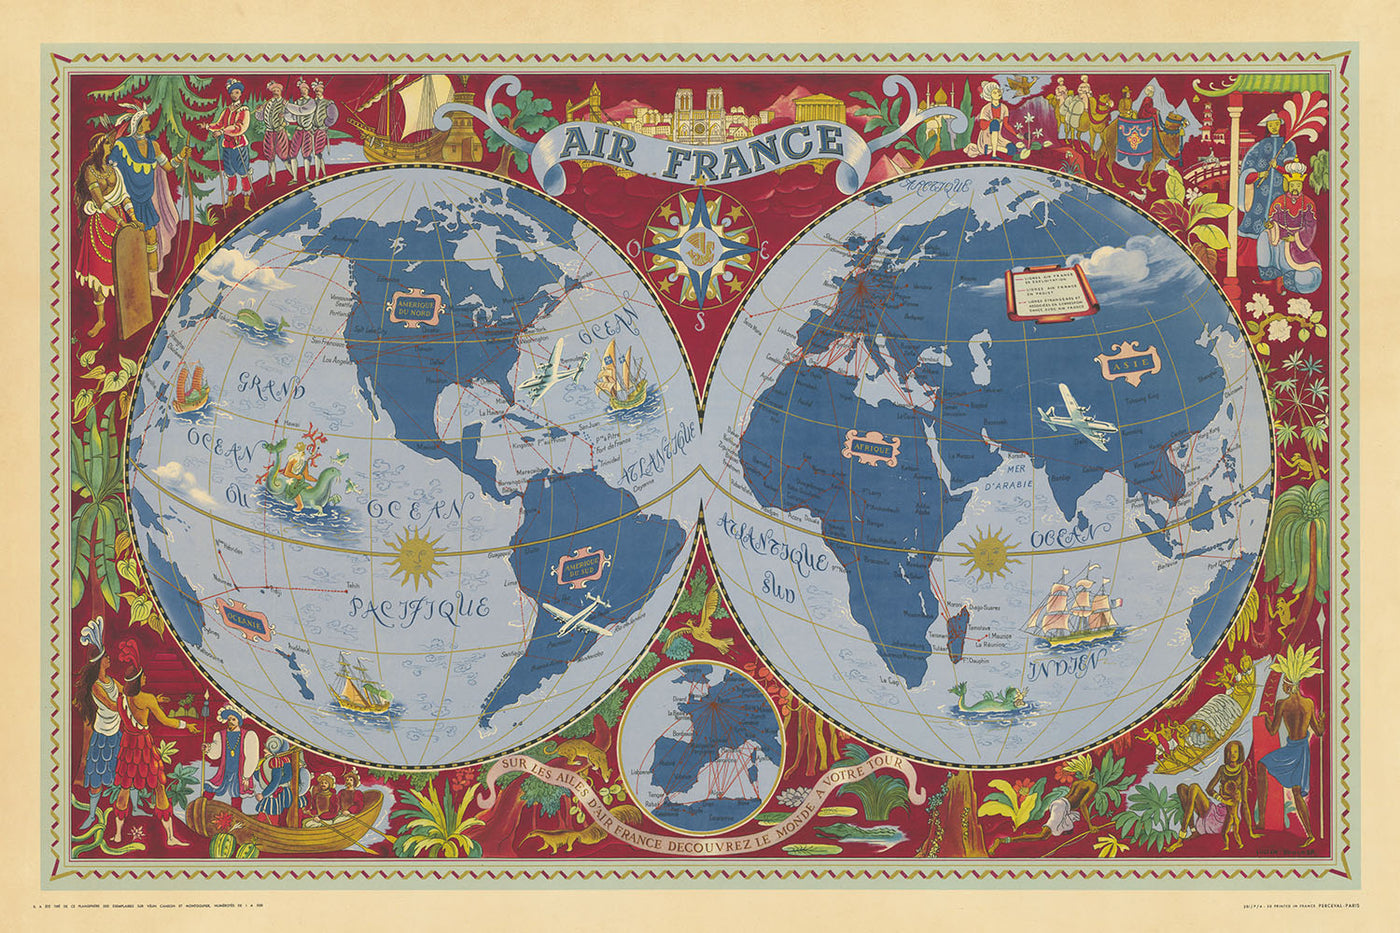 Old Surrealist World Map by Boucher, 1950: Air France Air Routes, Cultural Scenes, Sea Creatures